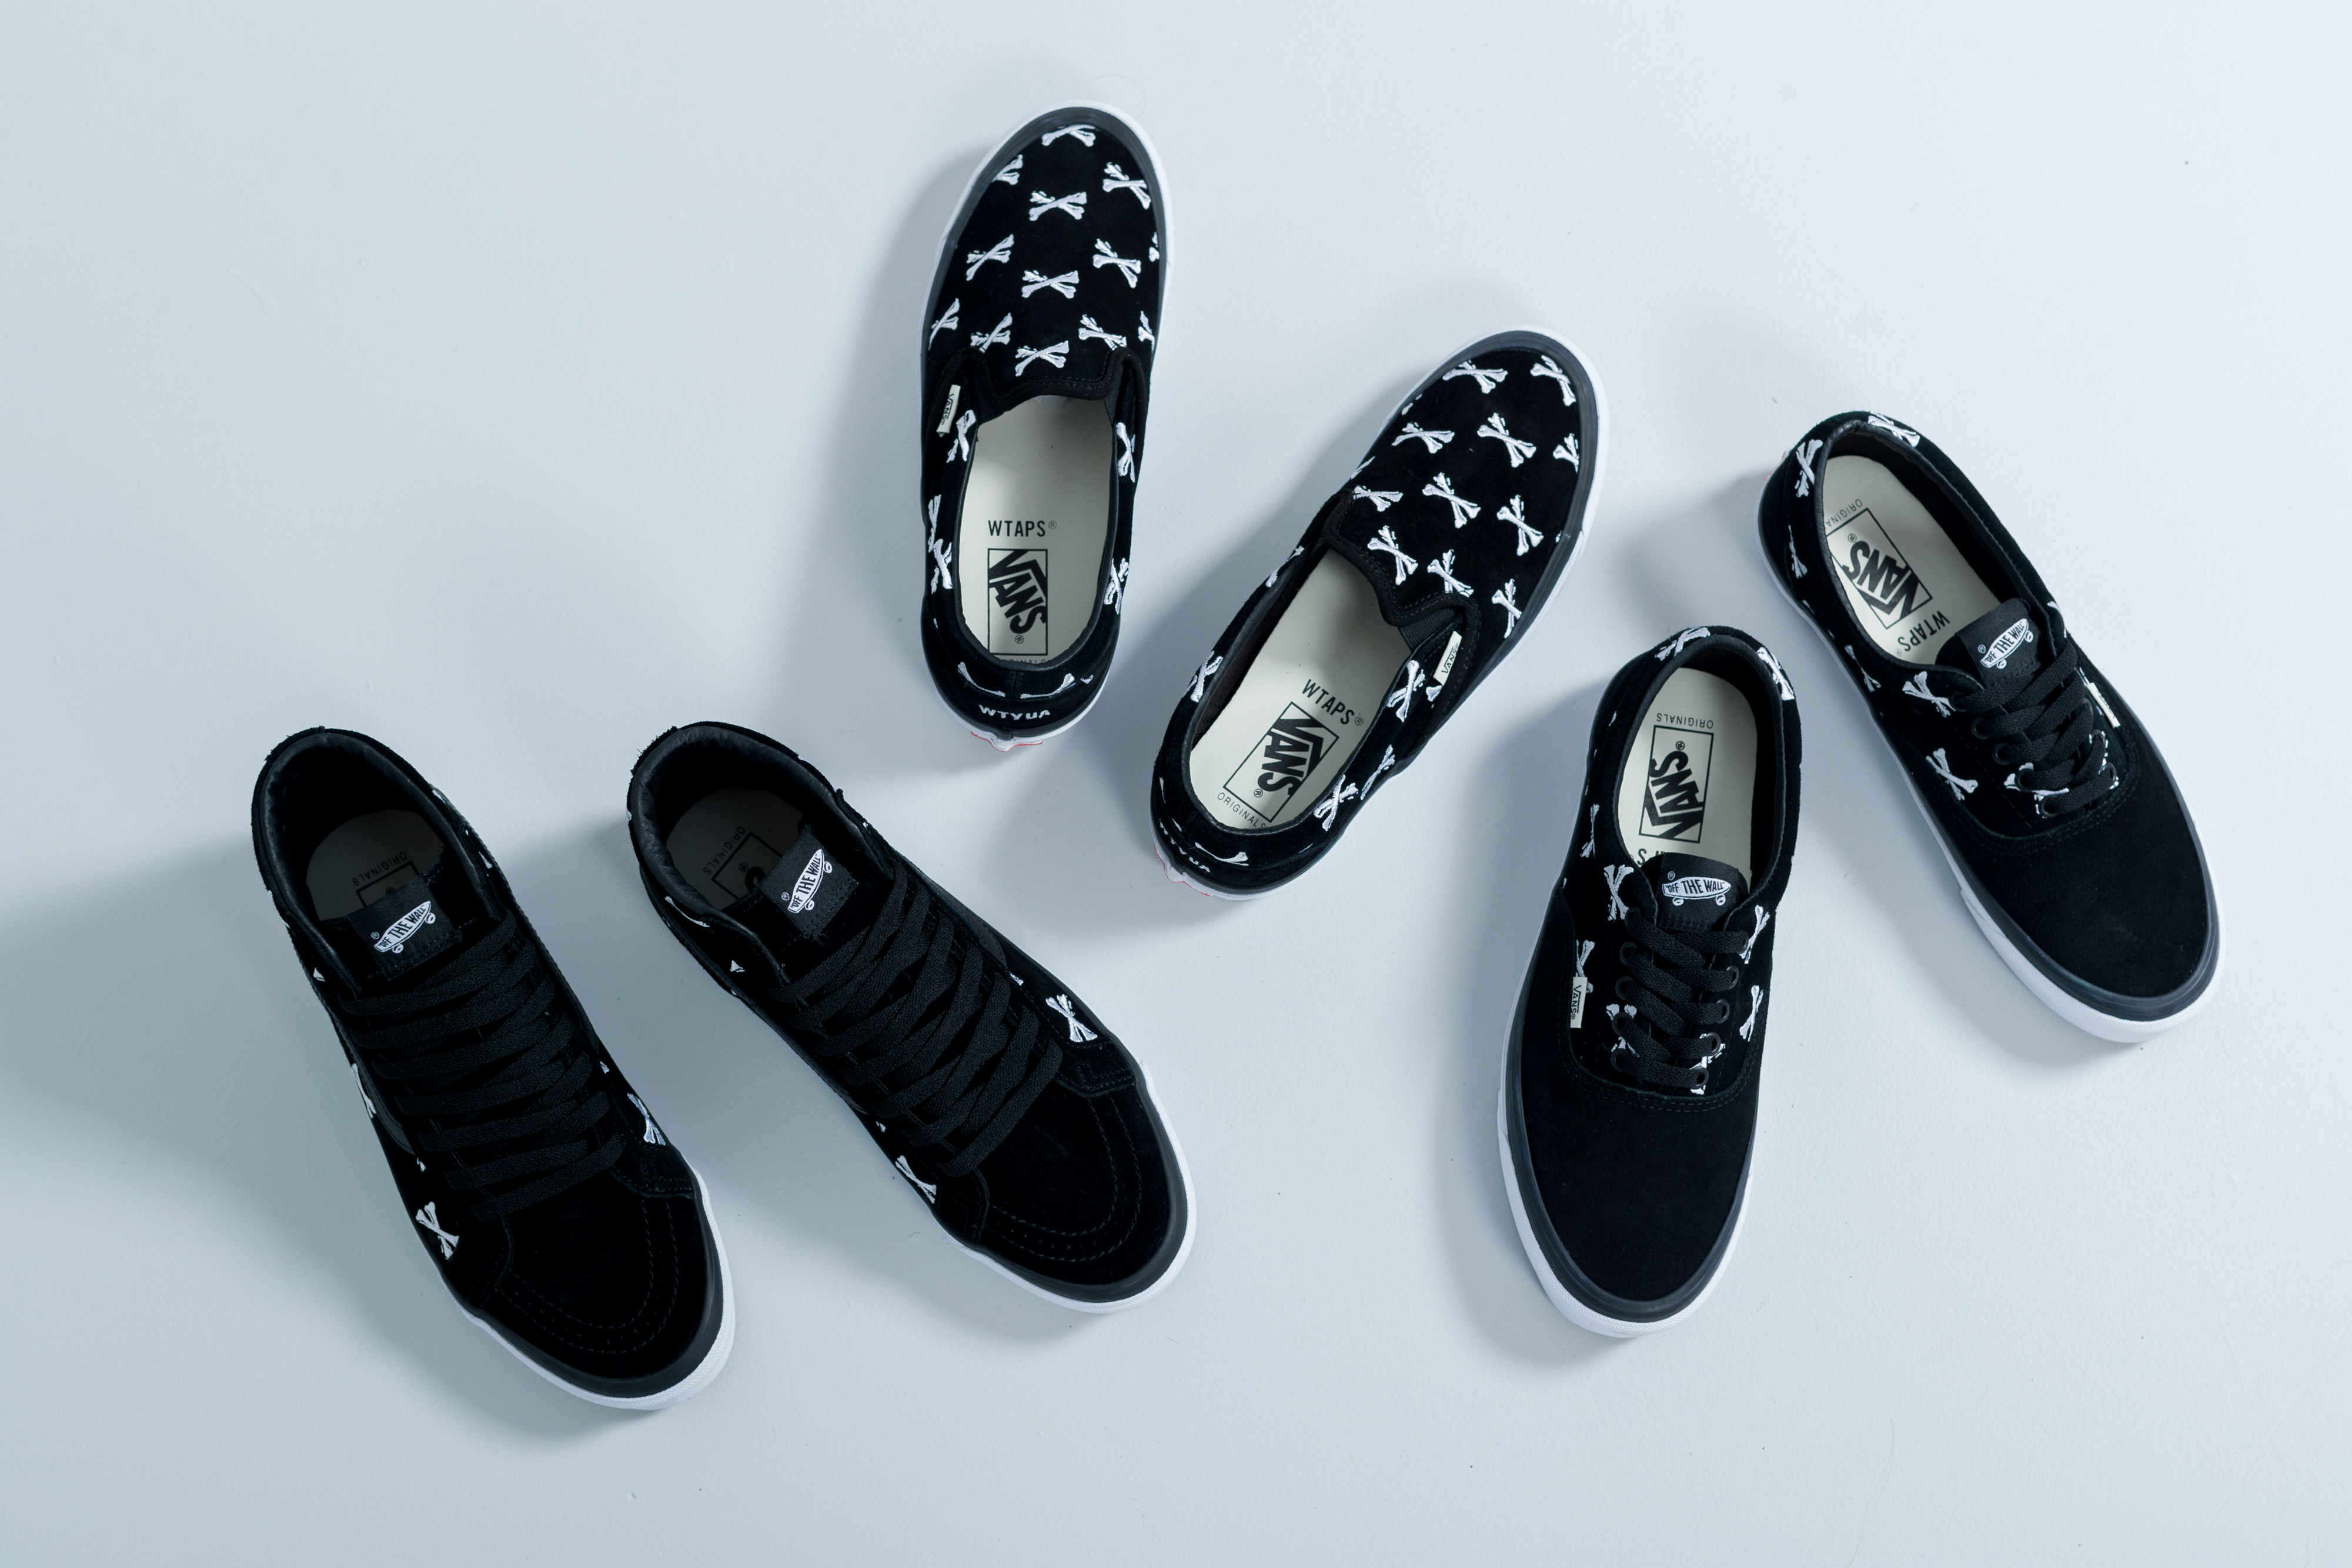 Up There Launches - Vans Vault X WTAPS